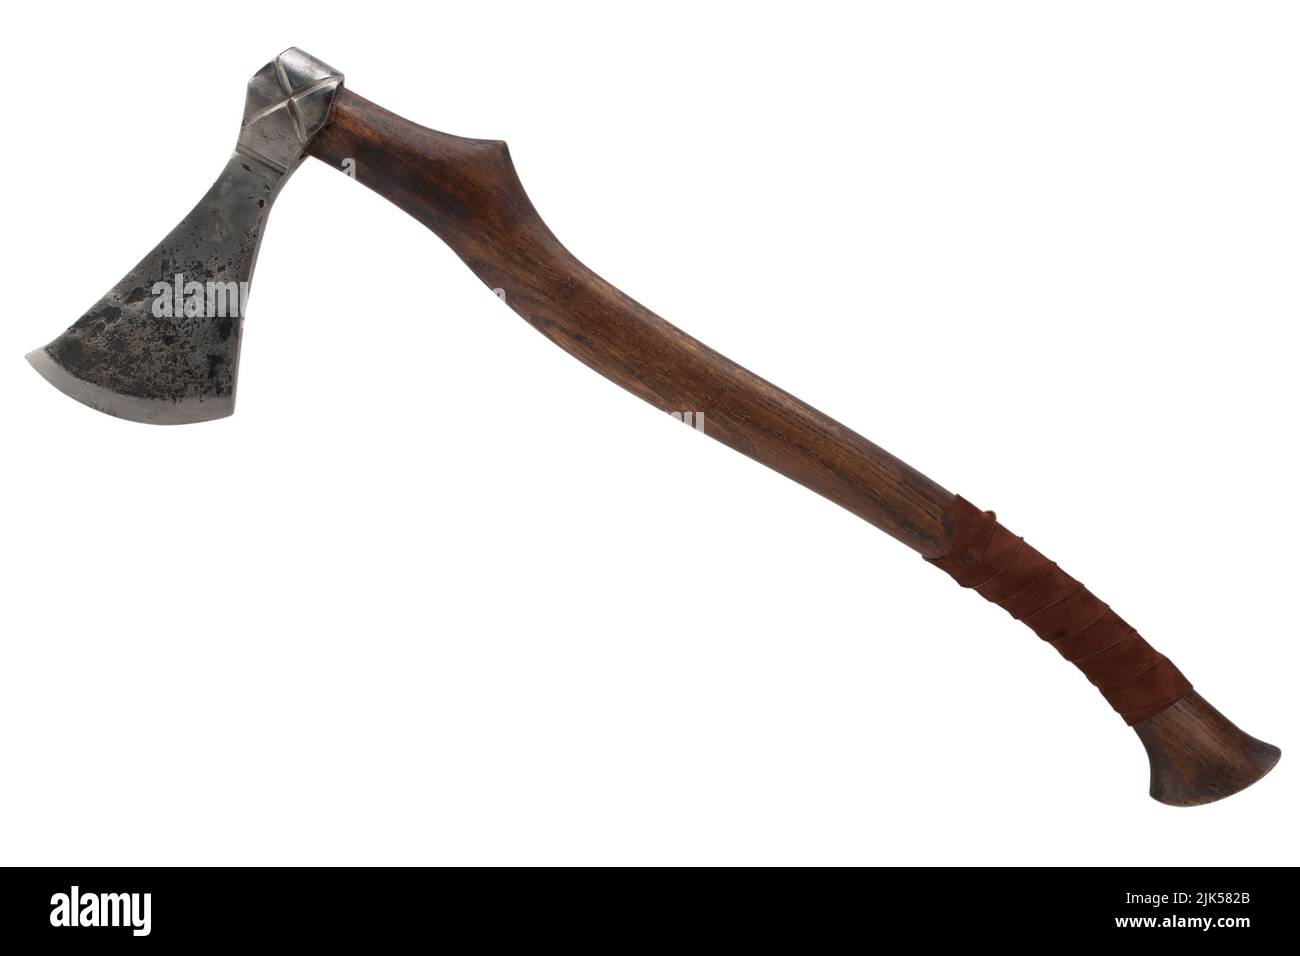 antique battle axe with wooden handle on white background Stock Photo